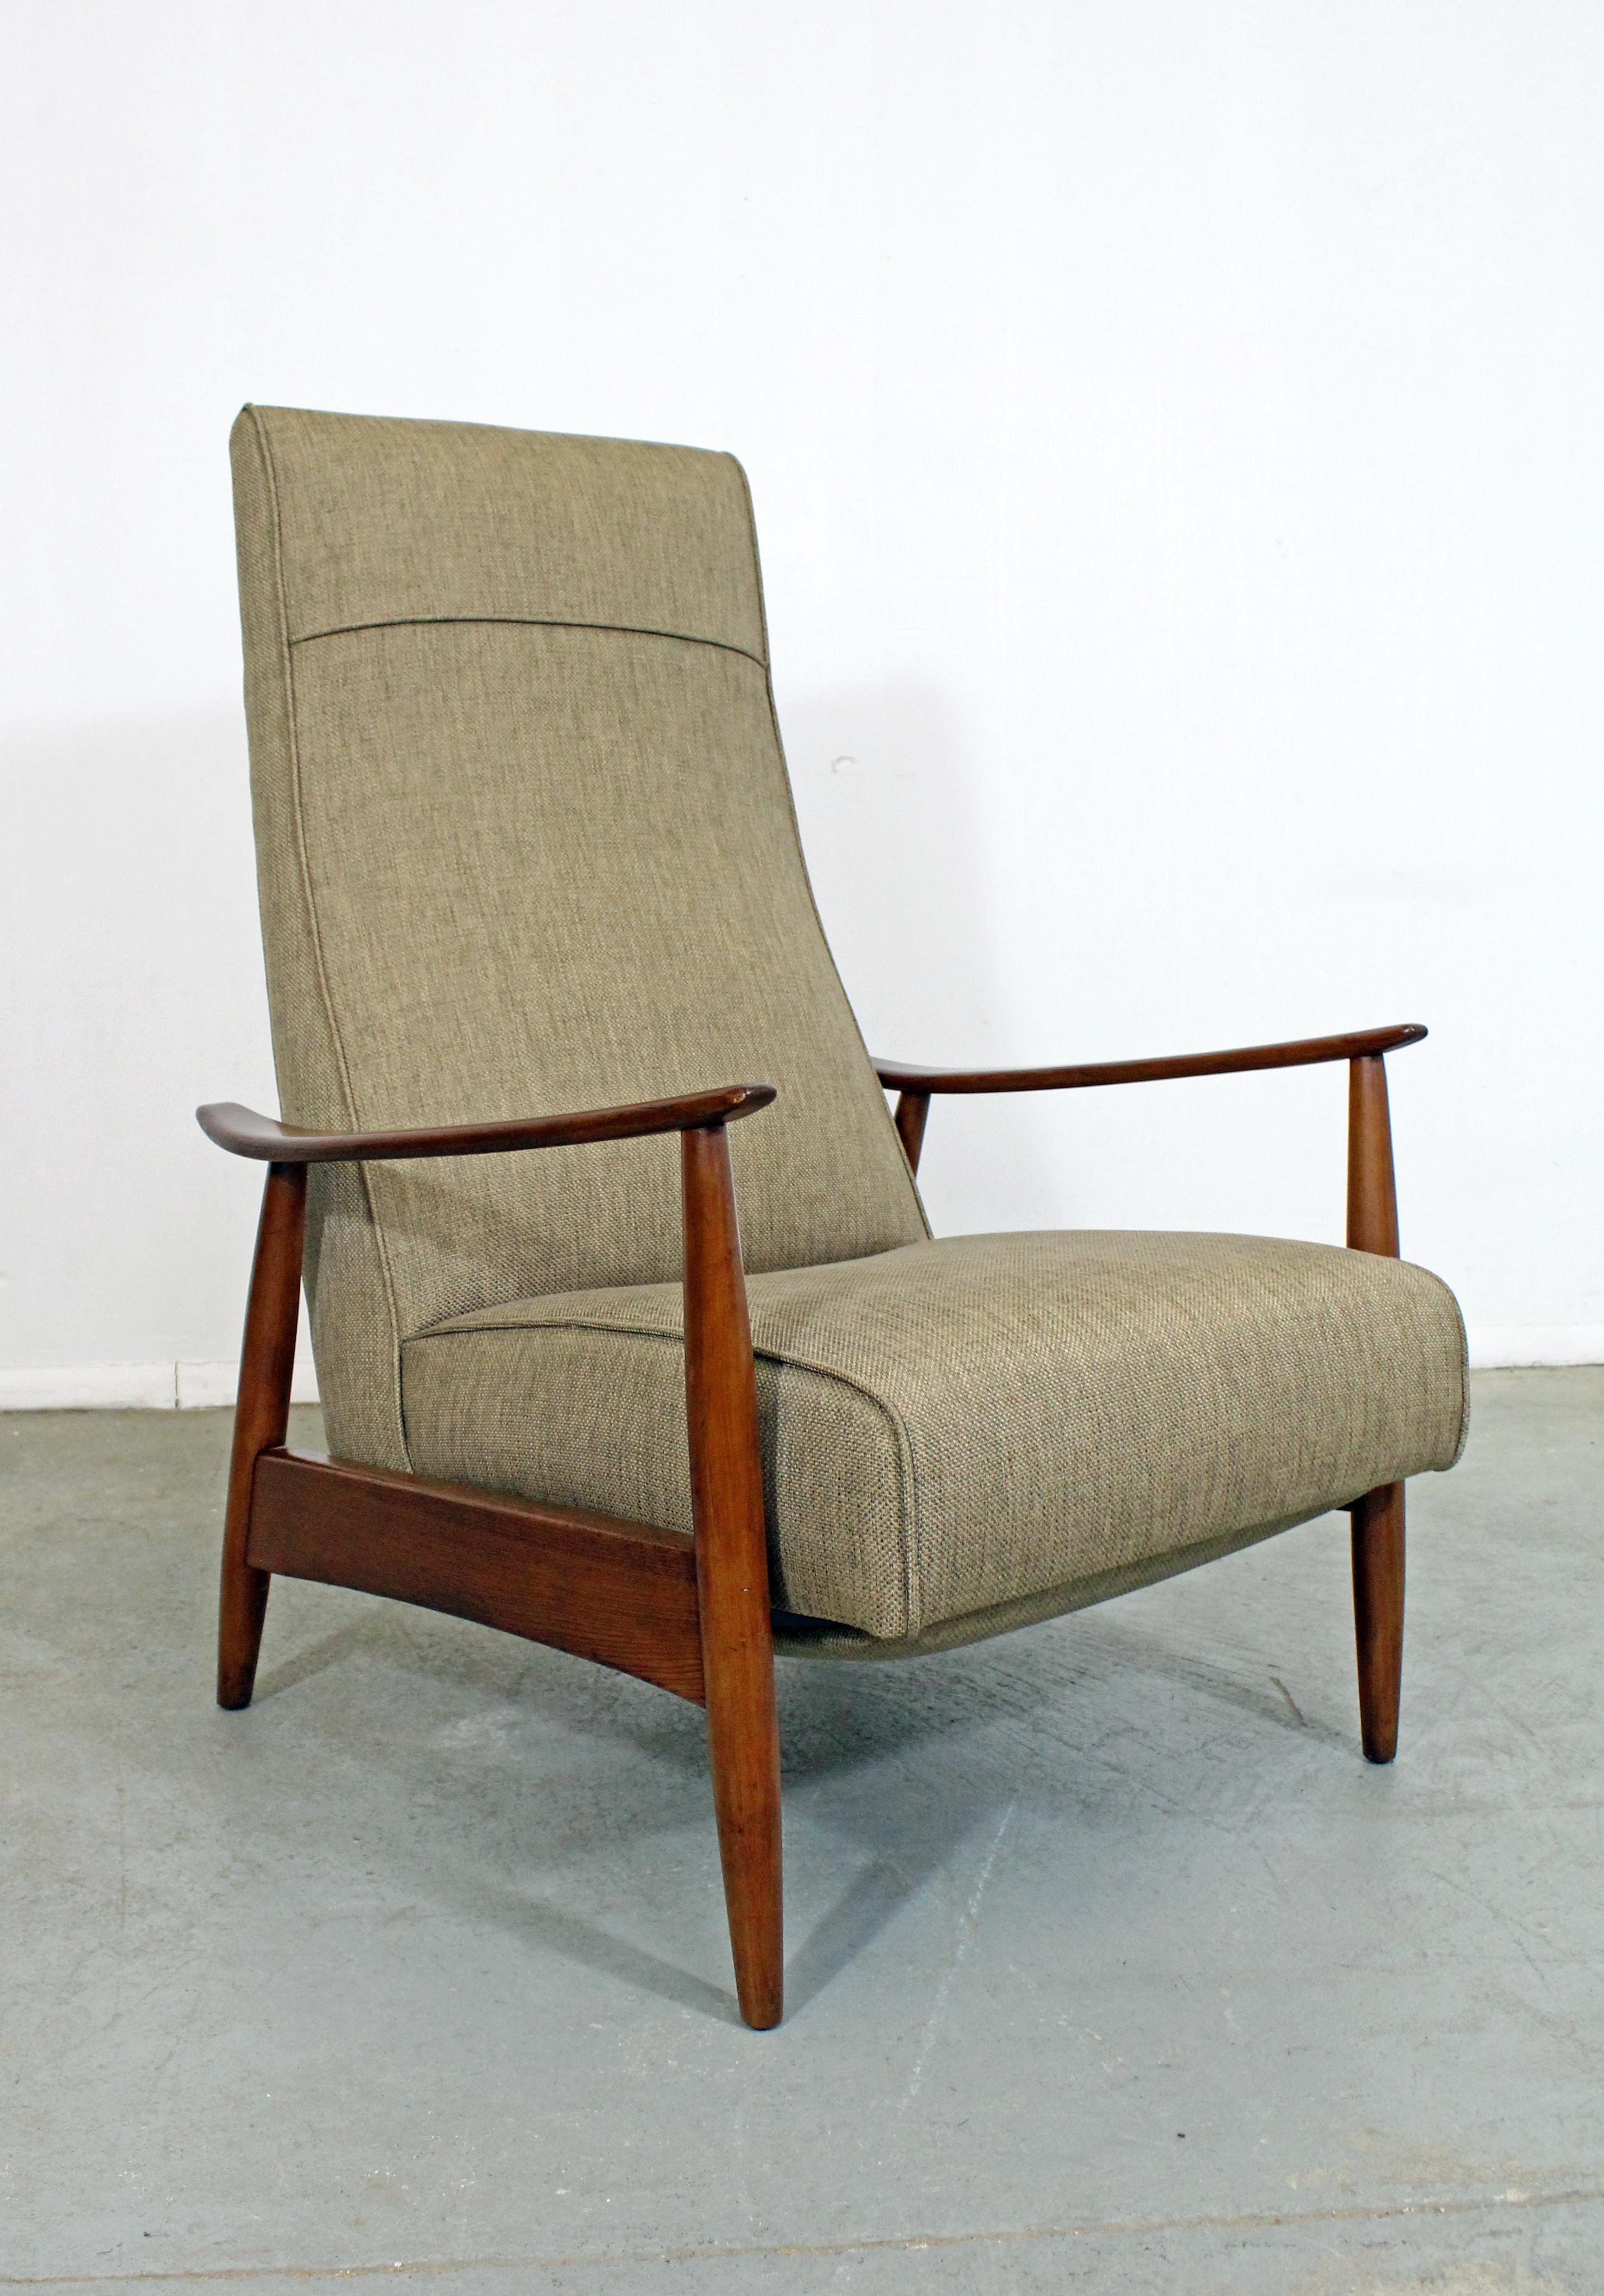 Midcentury Danish modern Milo Baughman Thayer Coggin recliner lounge chair.

What a find. Offered is a Mid-Century Modern arm/lounge chair, designed by Milo Baughman for Thayer Coggin. This chair has been completely restored (refinished &